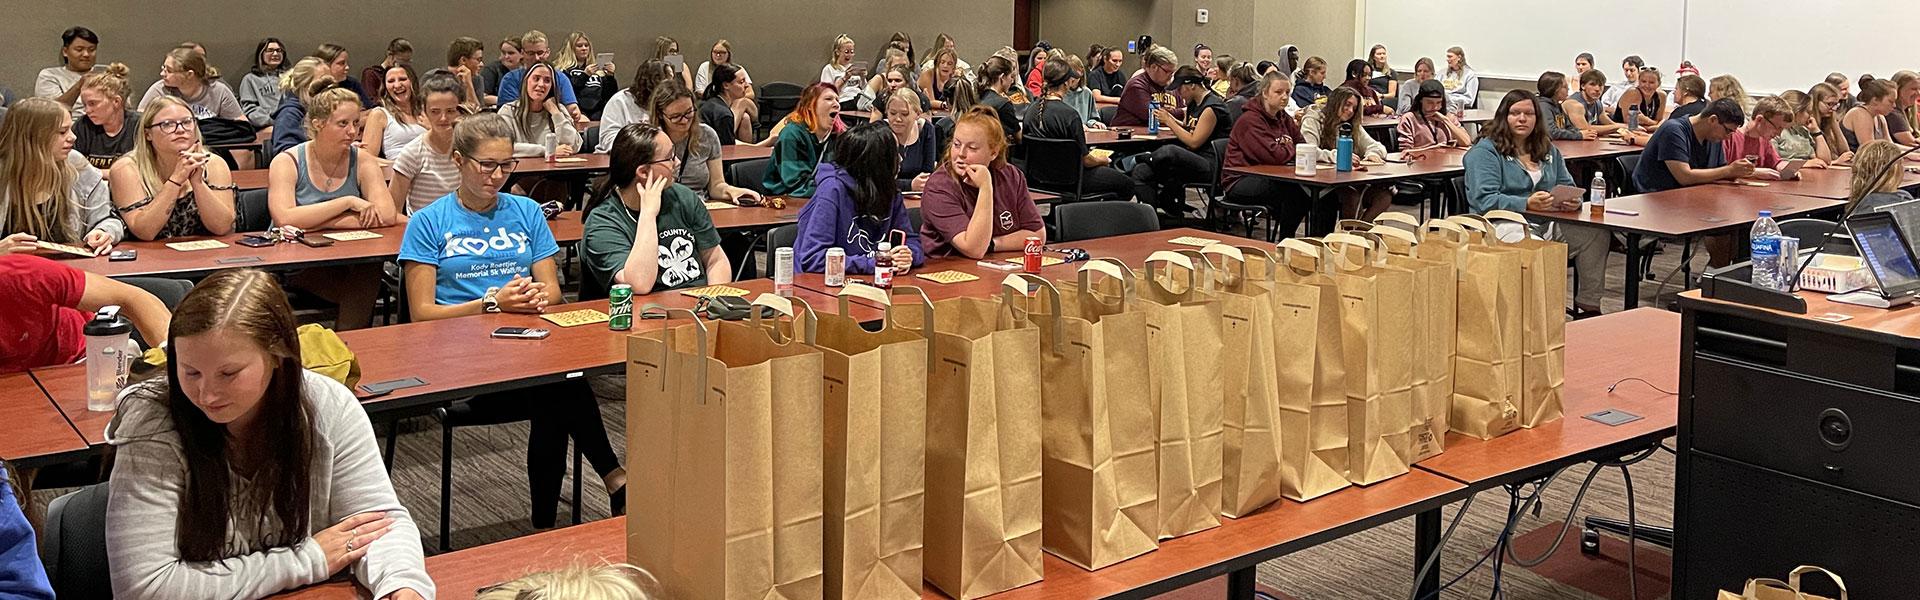 Students playing grocery bag bingo during a GEE event